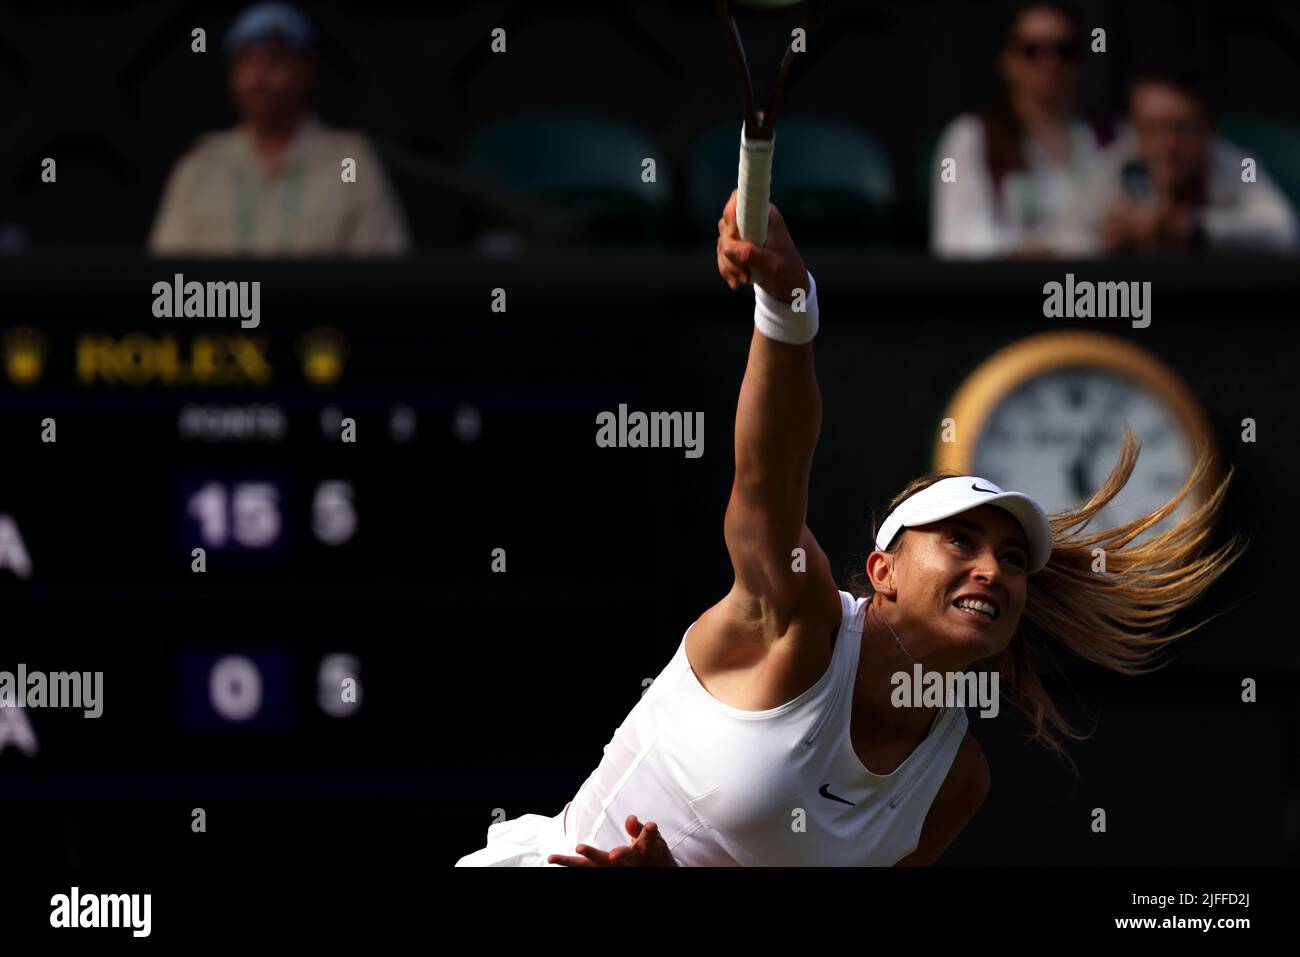 London. Number 4 seed Paula Badosa of, Spain. 2nd July, 2022. serving during her match against Petra Kvitova, of the Czech Republic. Badosa won the match in straight sets. Credit: Adam Stoltman/Alamy Live News Stock Photo